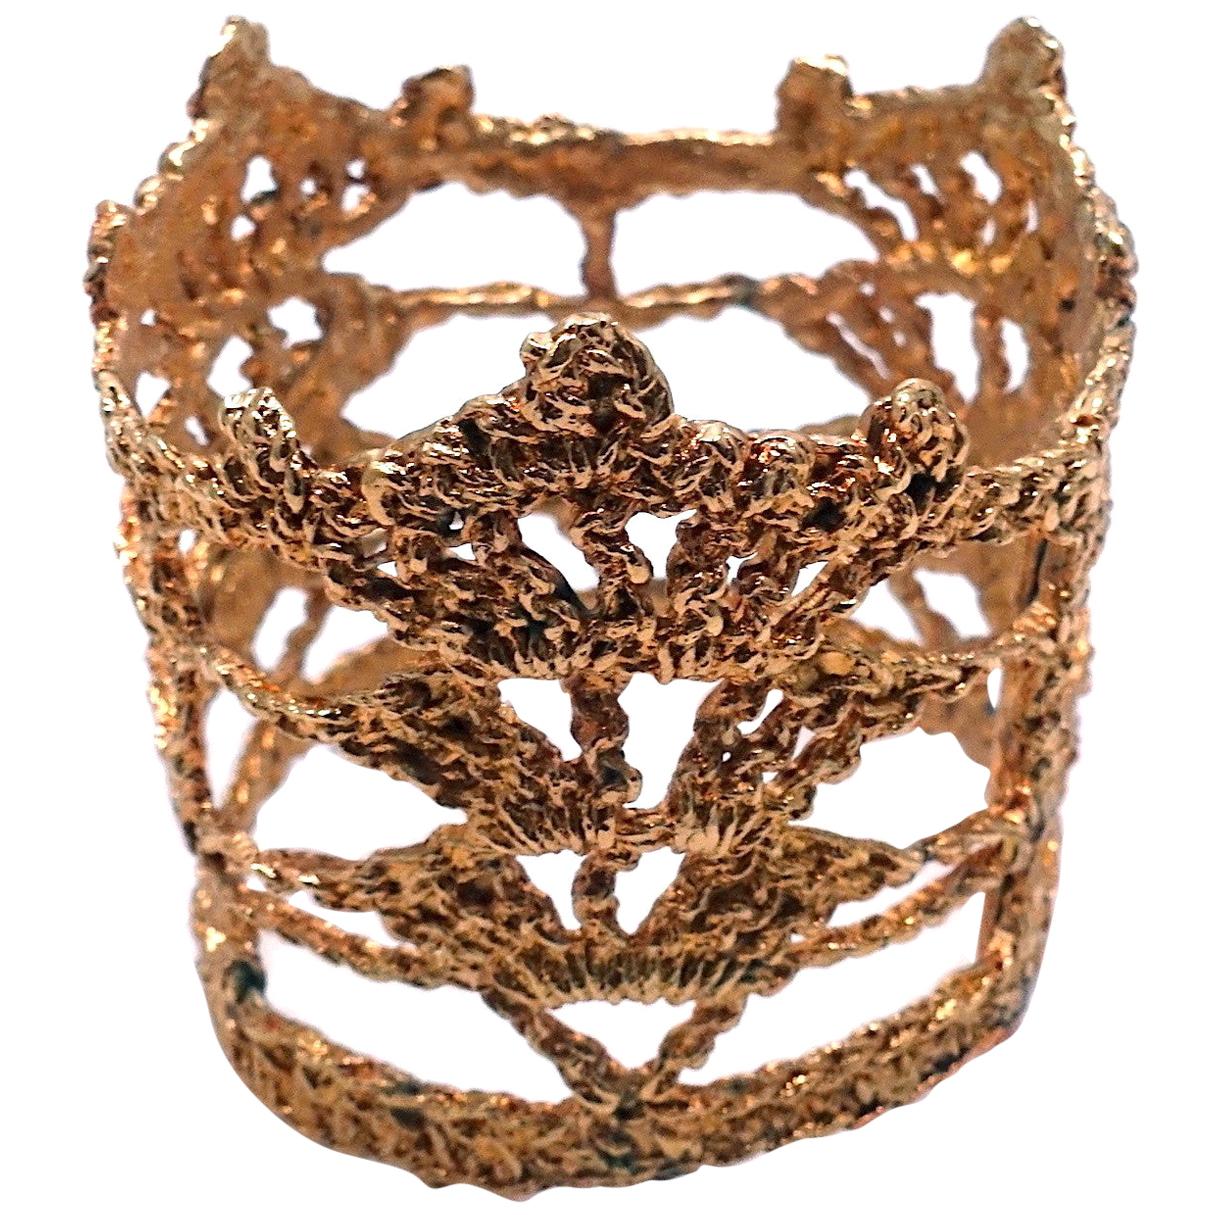 Vintage Christian LaCroix Intricate Openwork Cuff Bracelet For Sale